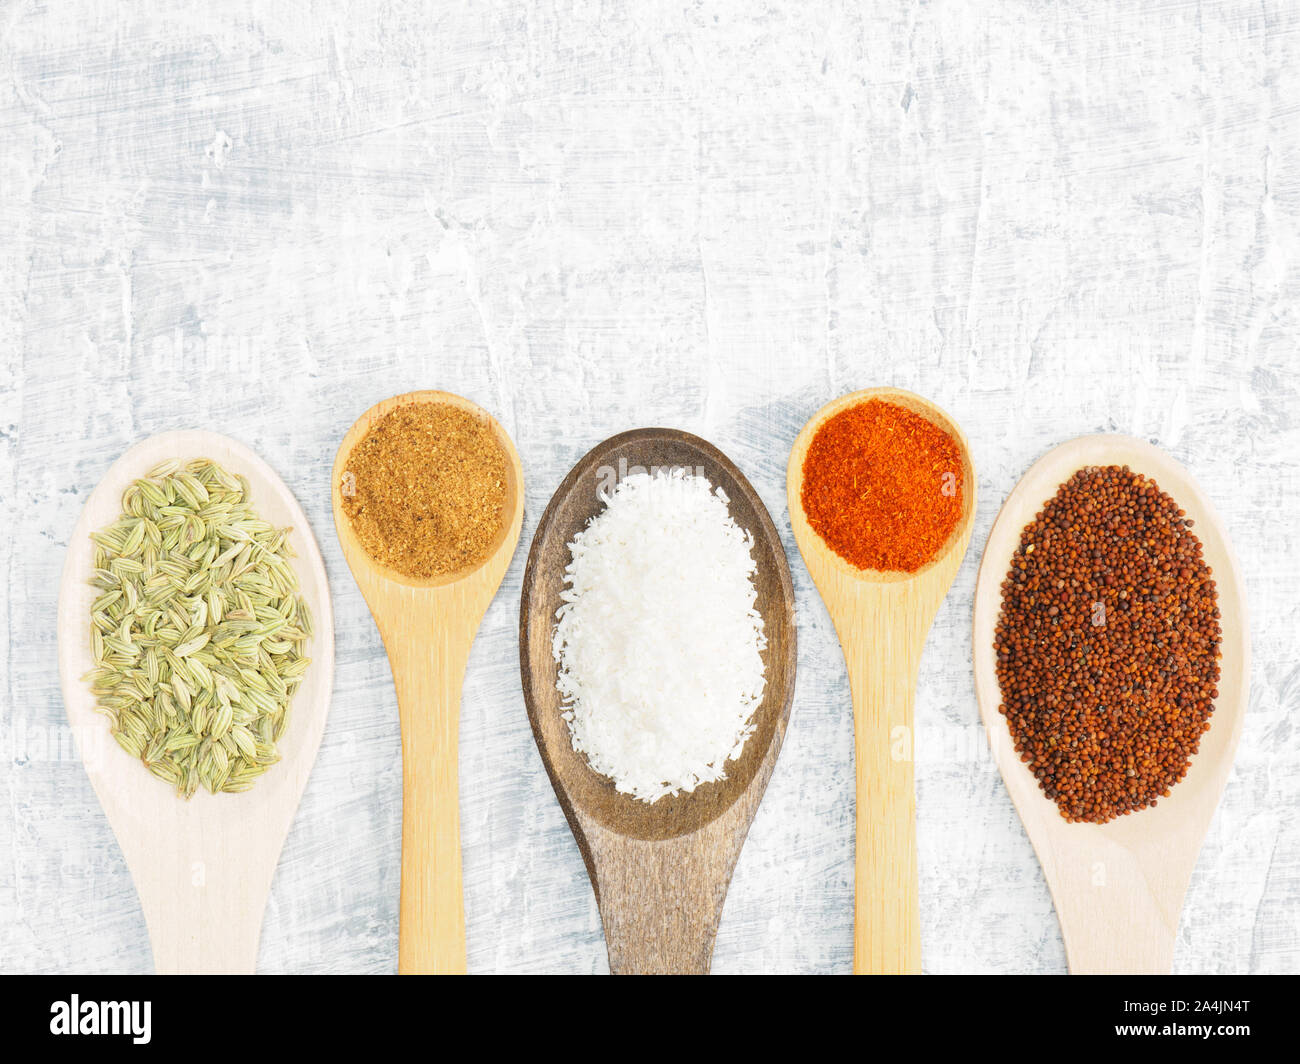 Spices and herbs set on concrete background in wooden spoon. Fennel, mustard, chili pepper, masala. Modern apothecary, naturopathy and ayurveda concep Stock Photo